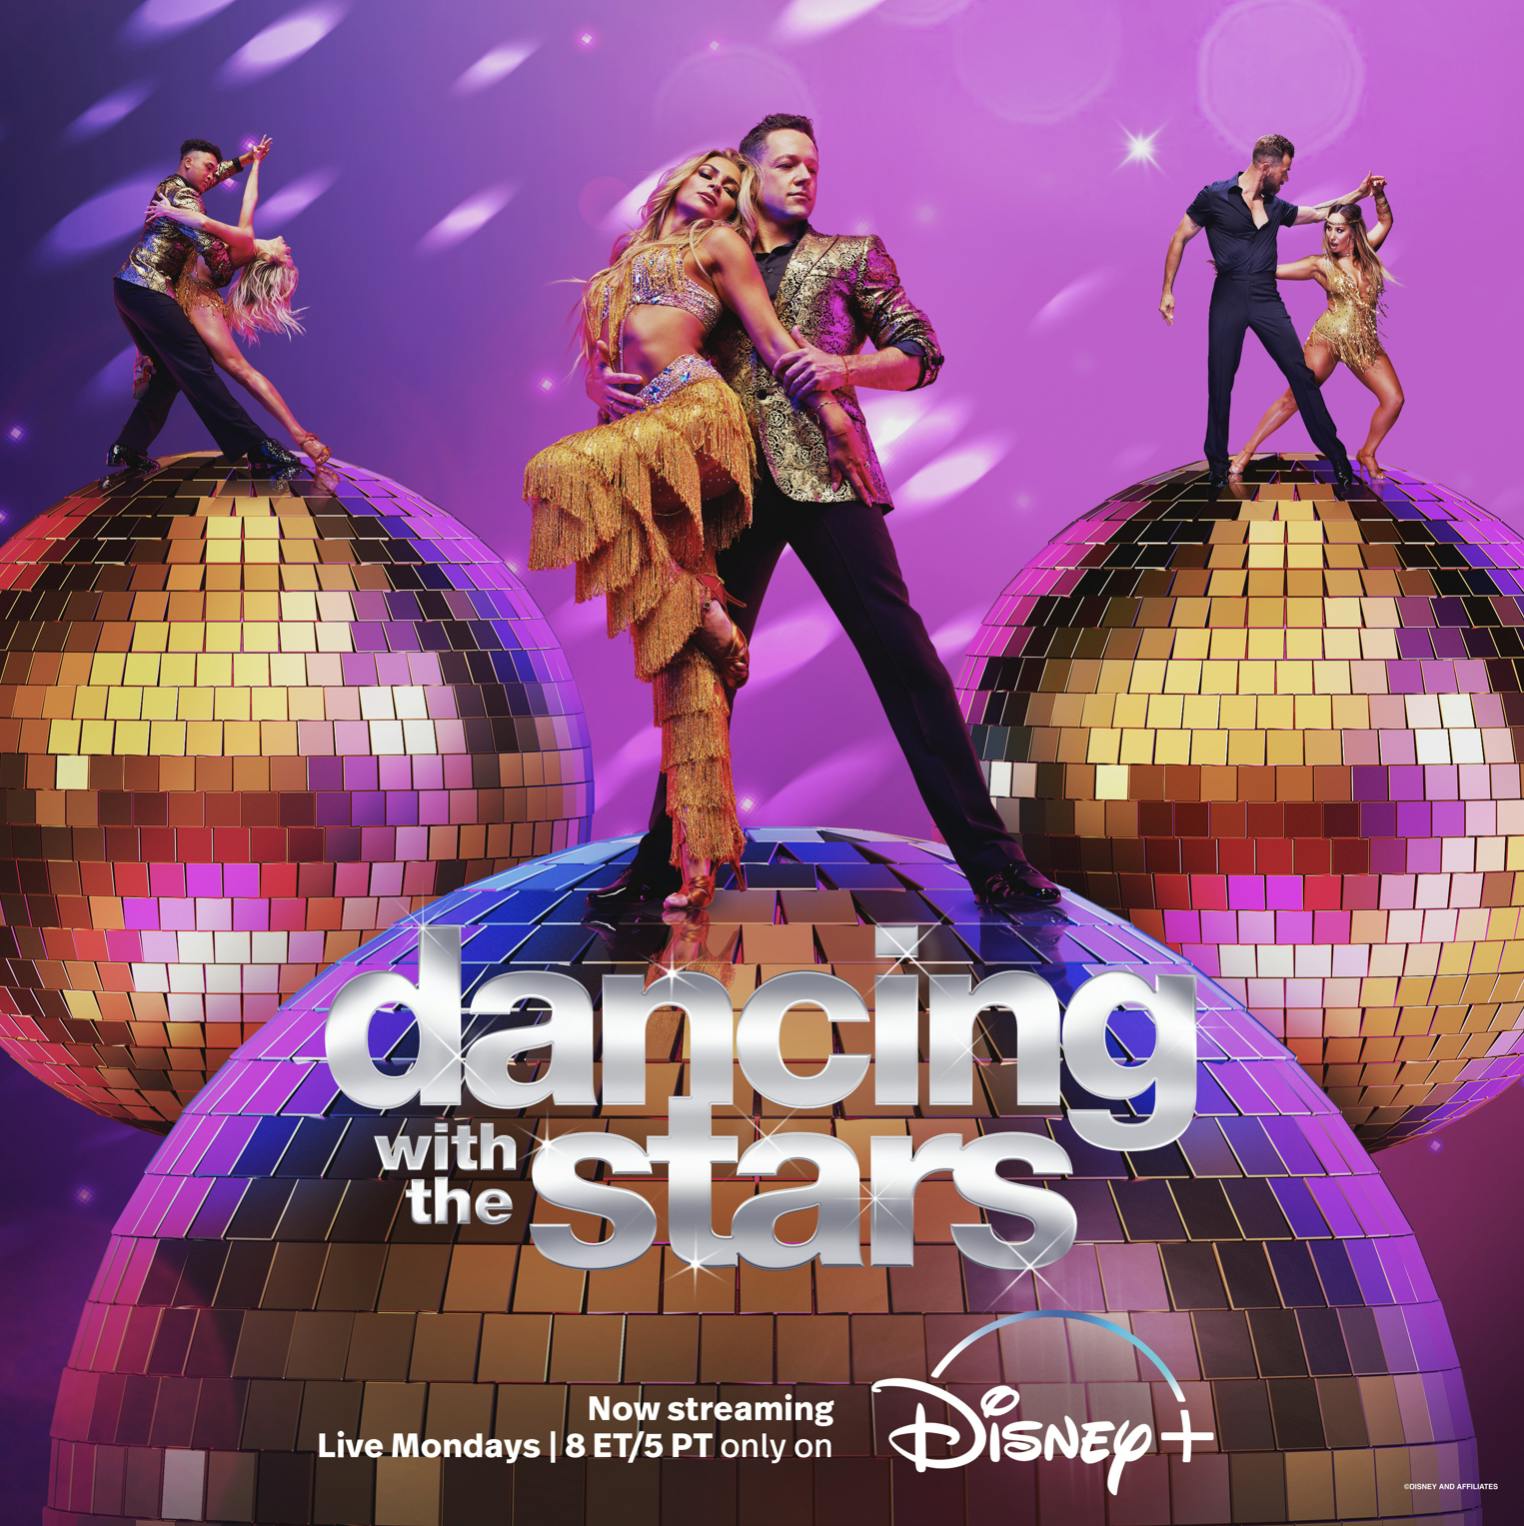 Dancing With The Stars Season 31 enters its fourth week